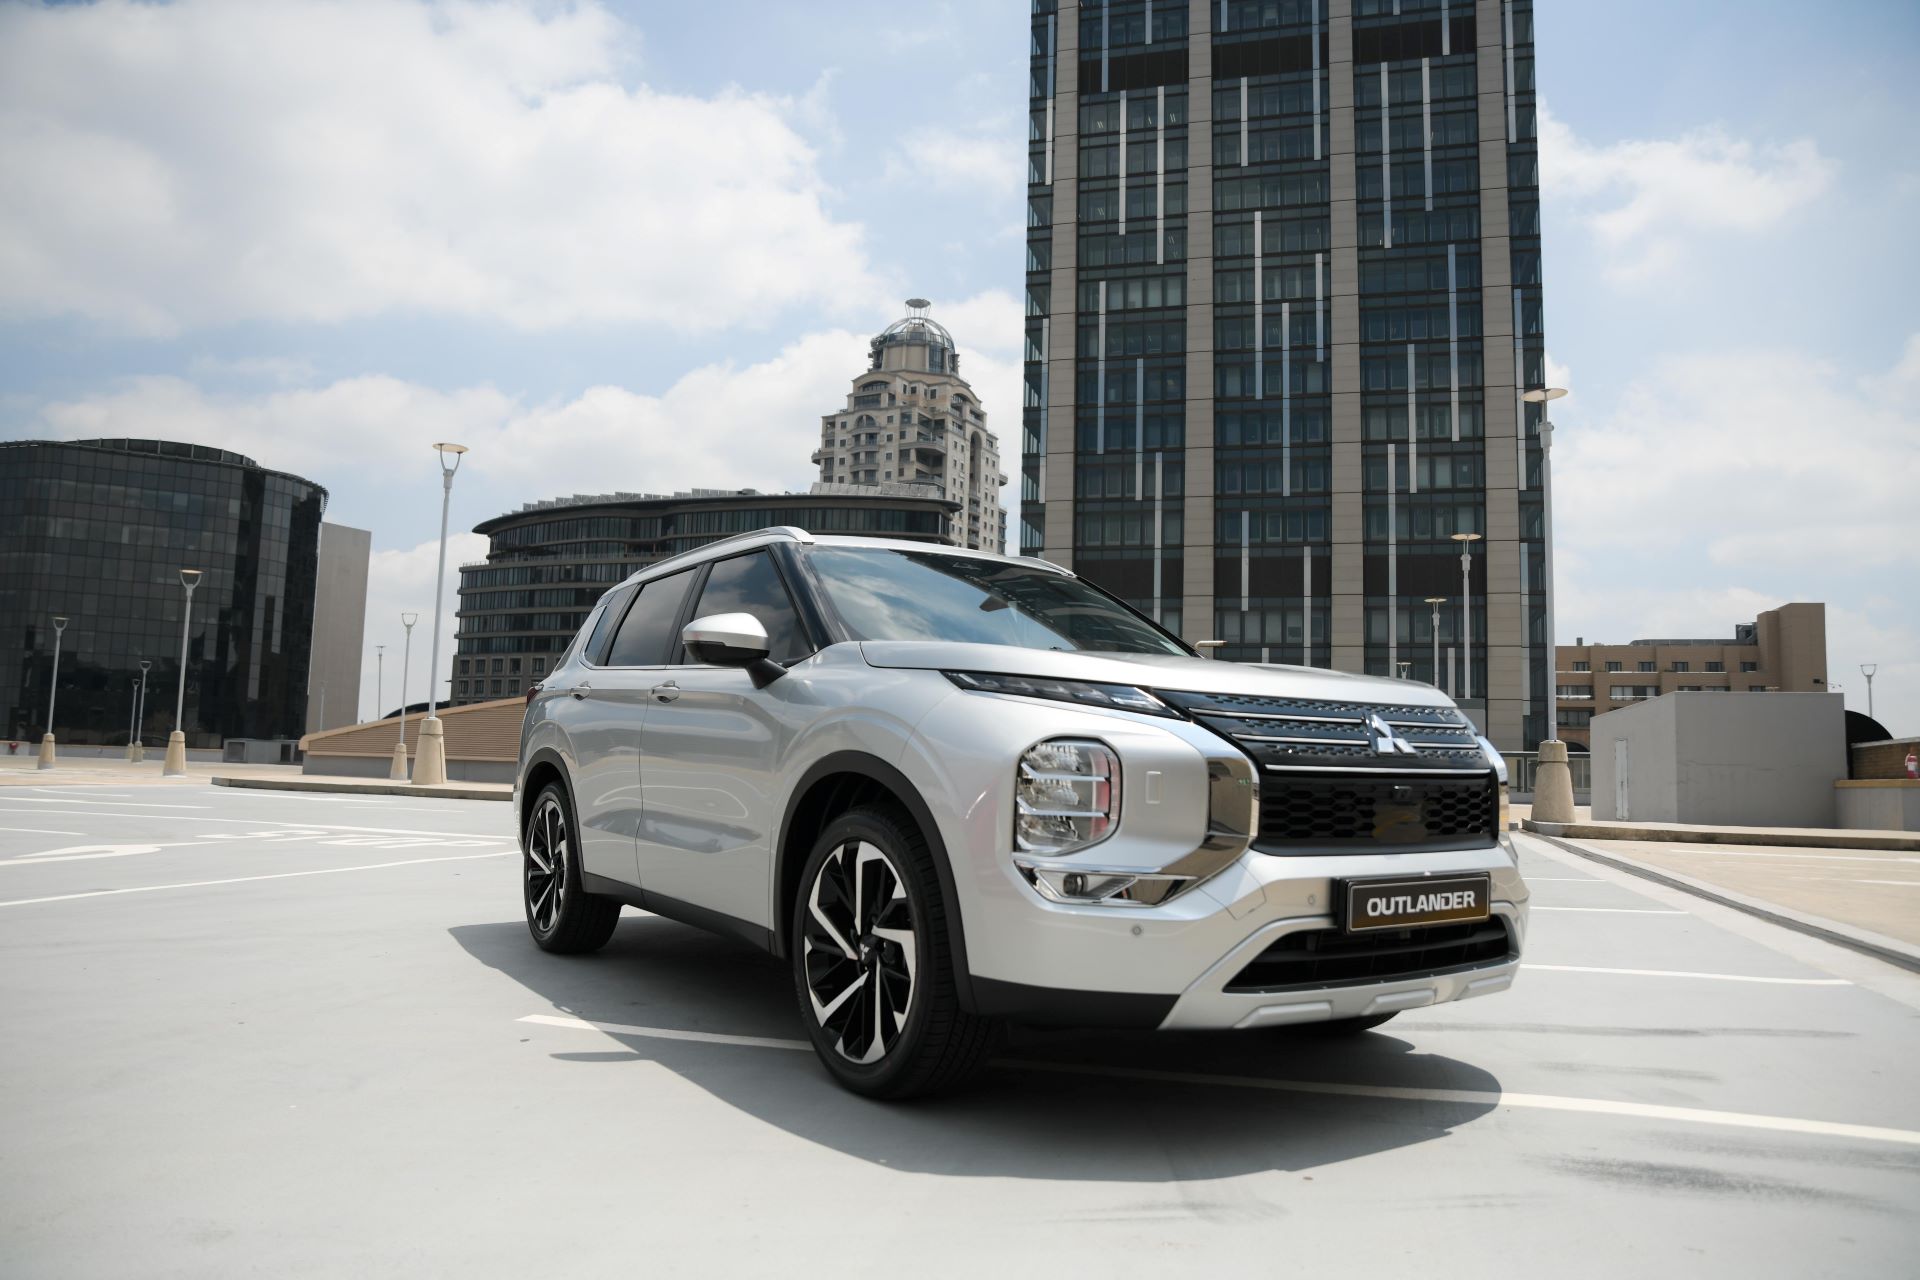 Mitsubishi widens appeal of Outlander range with tech laden model offering